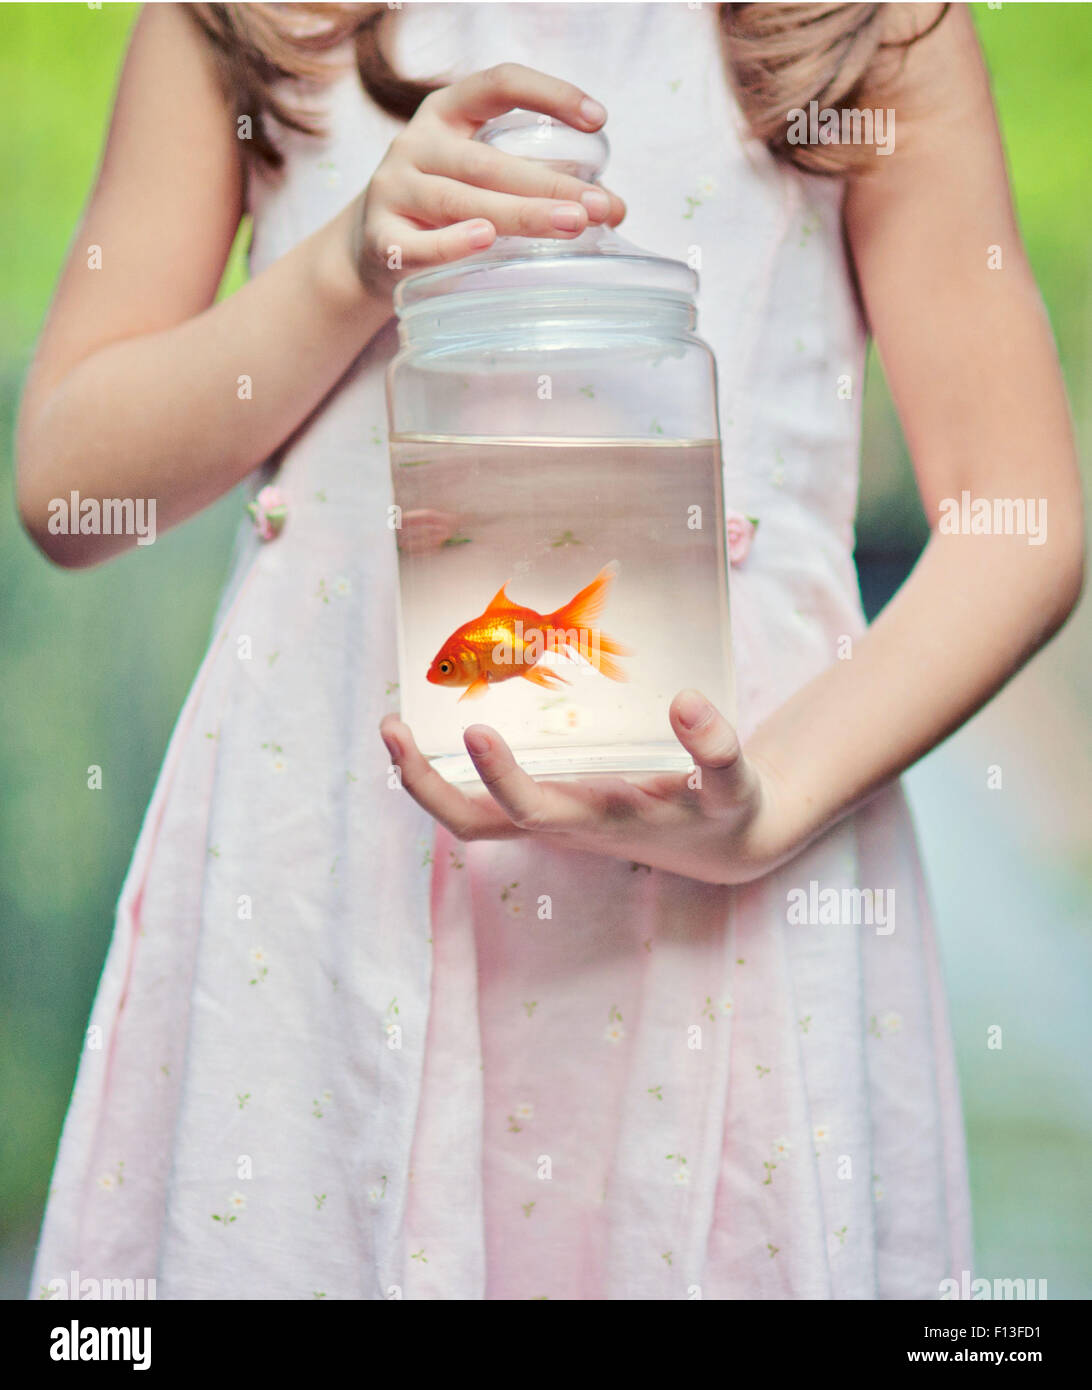 Girl holding a Goldfish in a jar Stock Photo